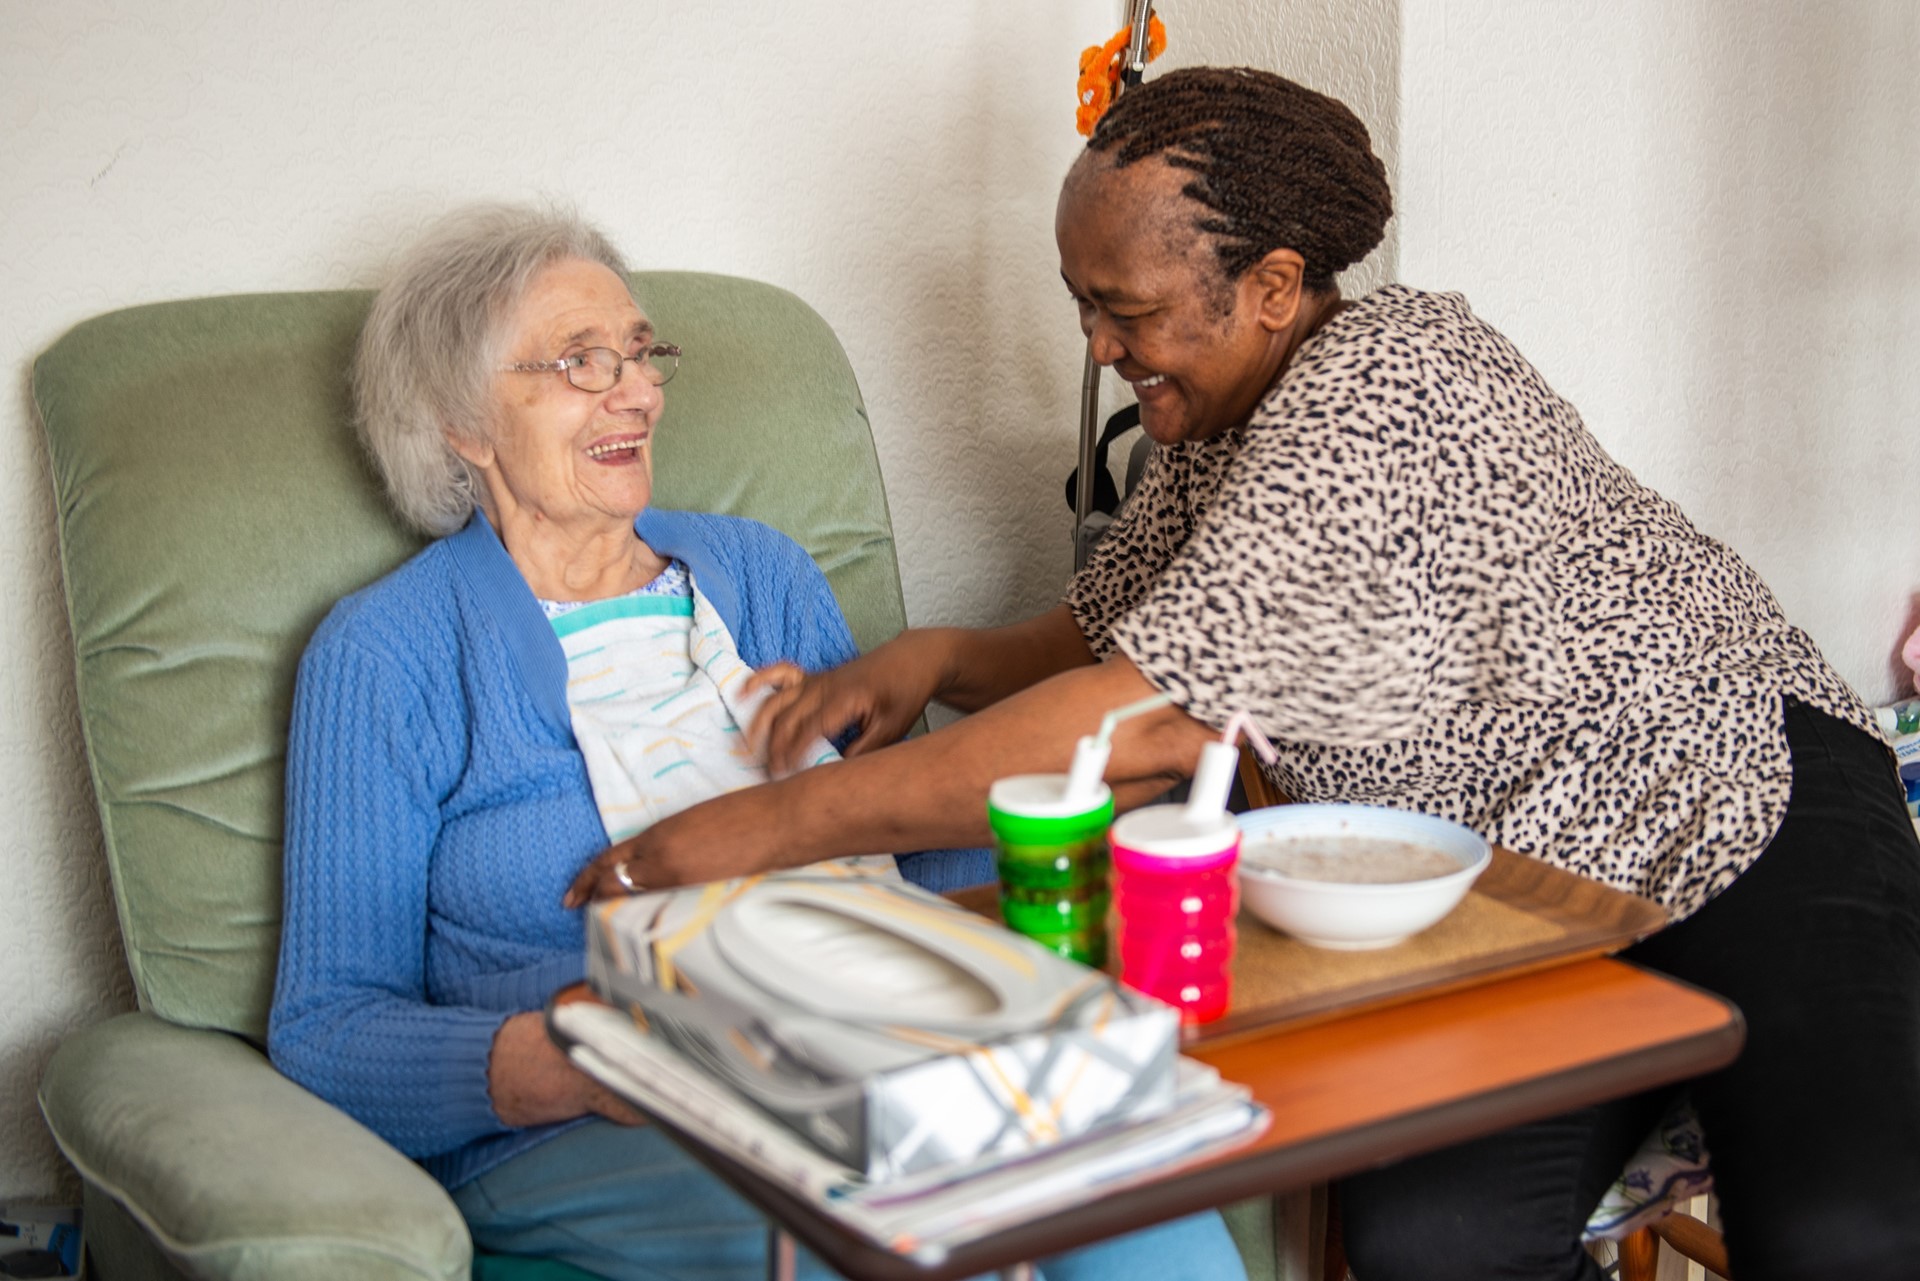 CareGiver helping client with mealtime